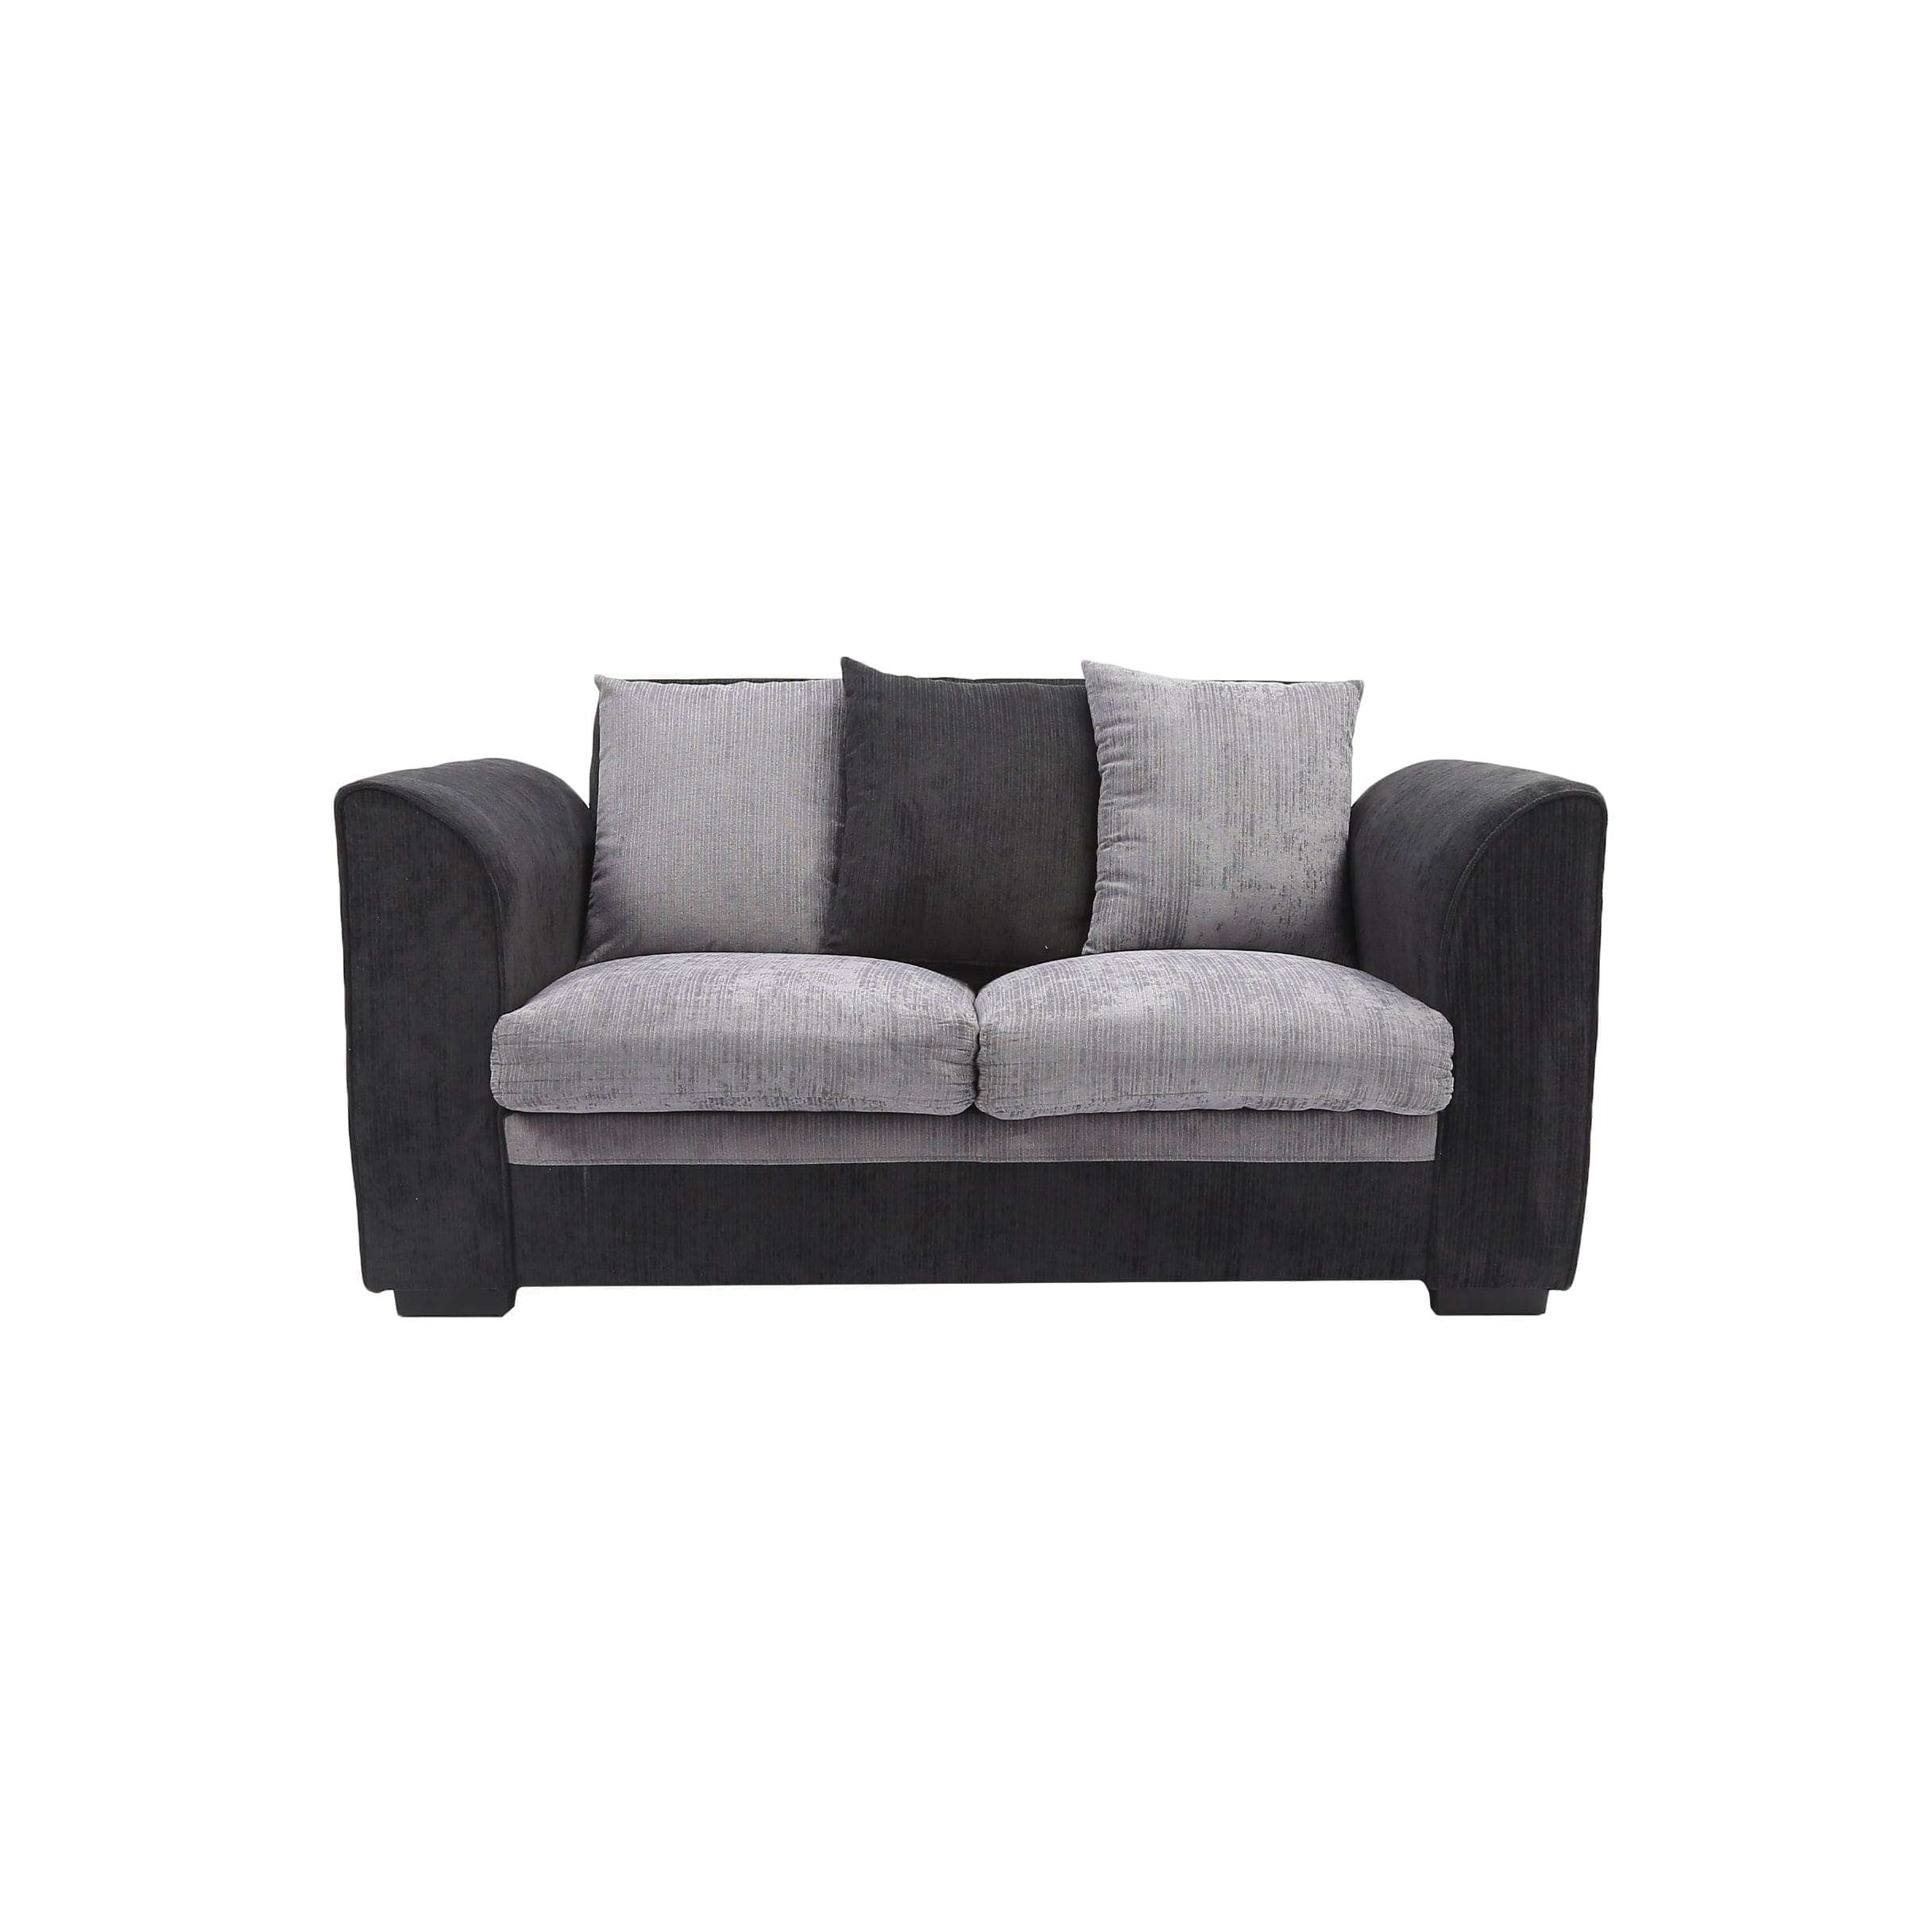 - 3 pcs Living room set by TFC&H Co.（Sofa+Loveseat+Ottoman）- Ships from The US - Sofas & Sectionals at TFC&H Co.